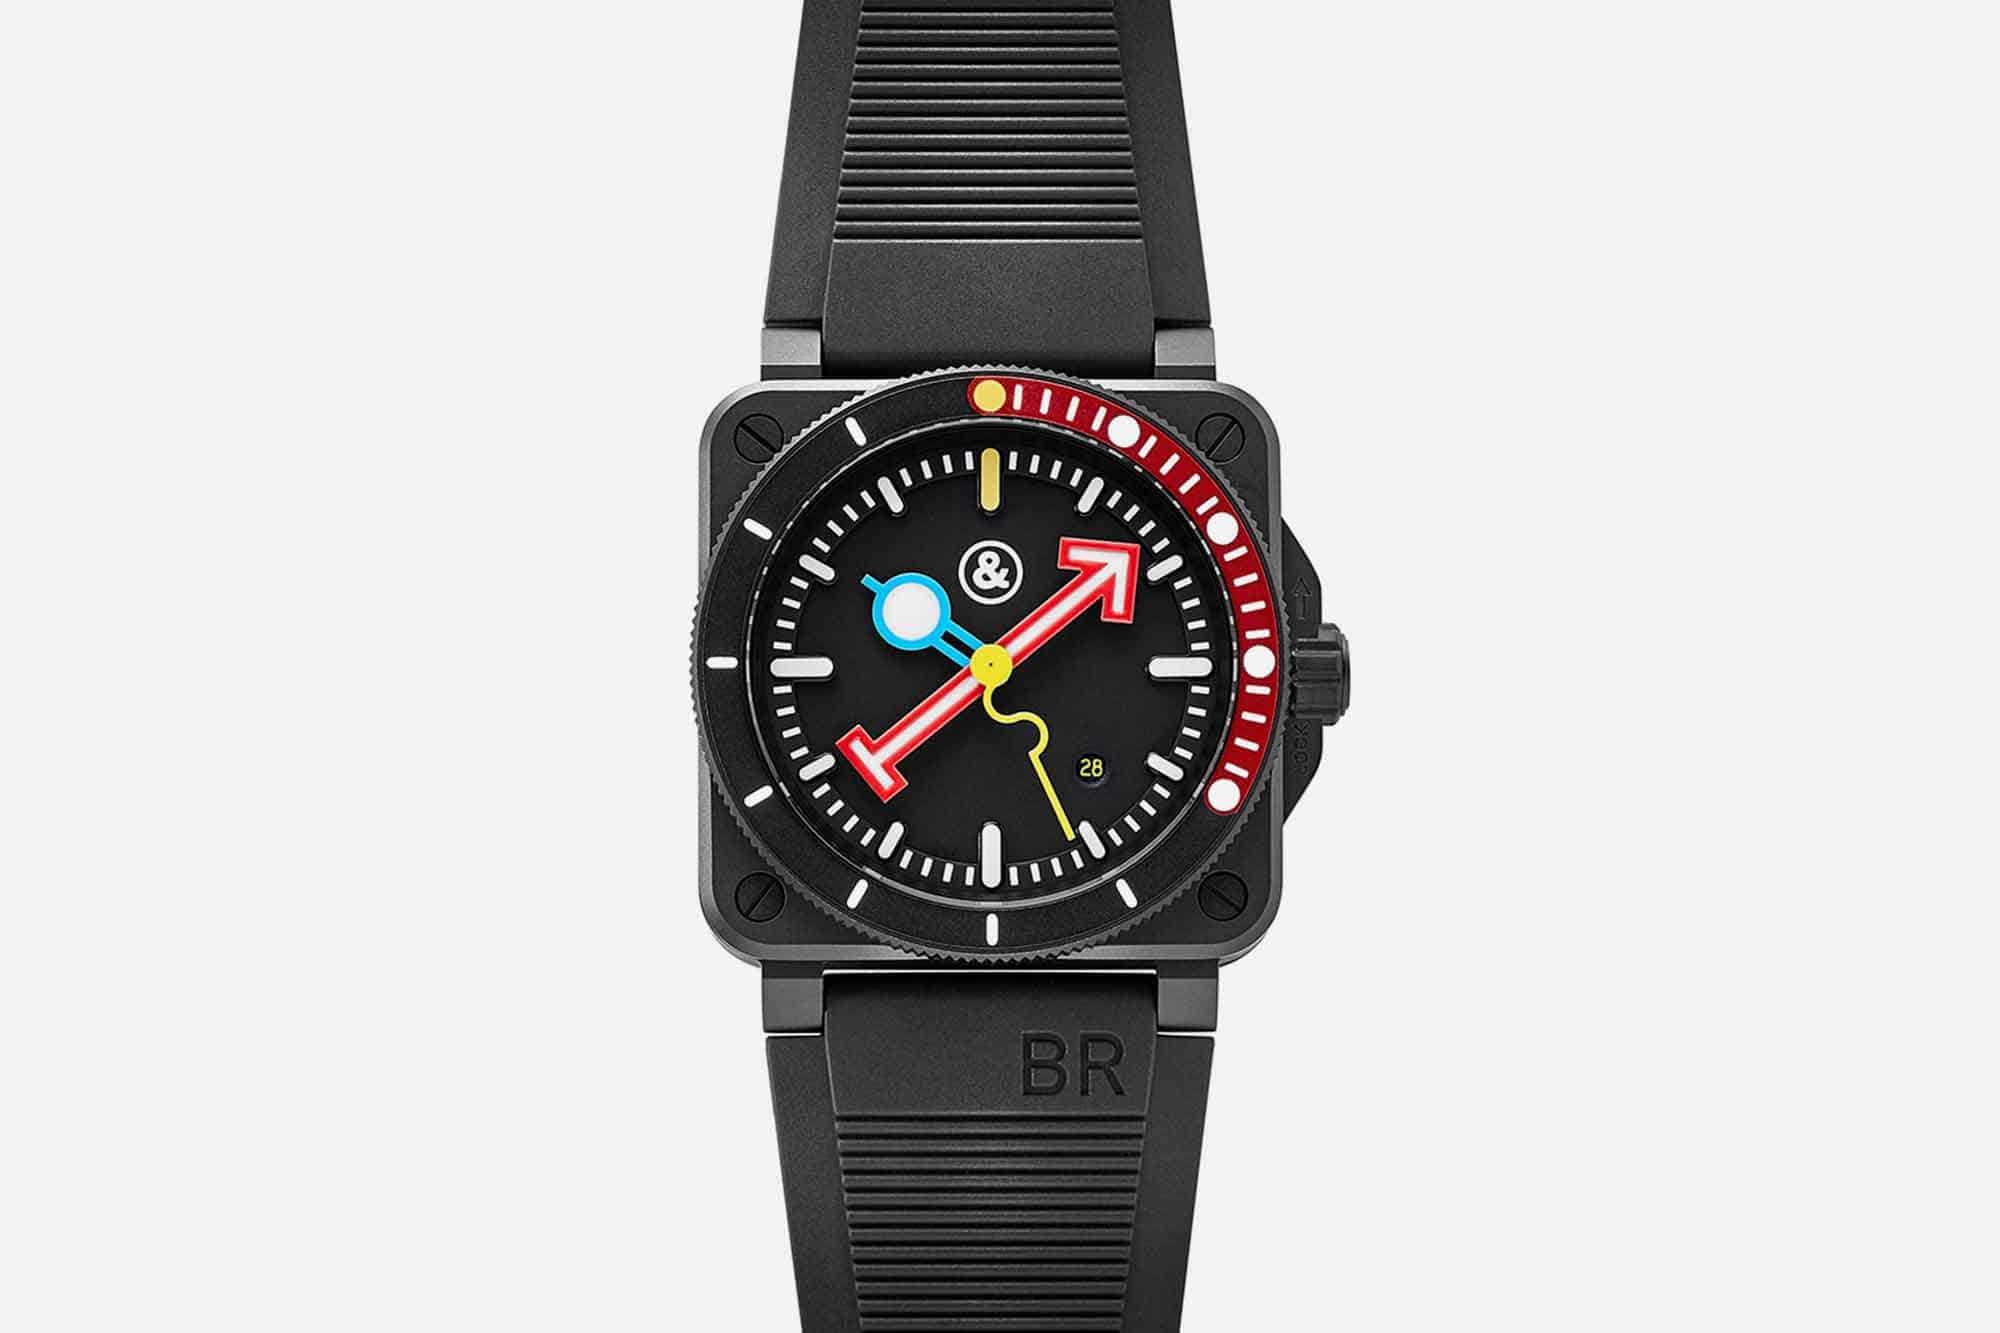 Three Bell & Ross Watches Get the Alain Silberstein Treatment with the Newest Release from Grail Watch